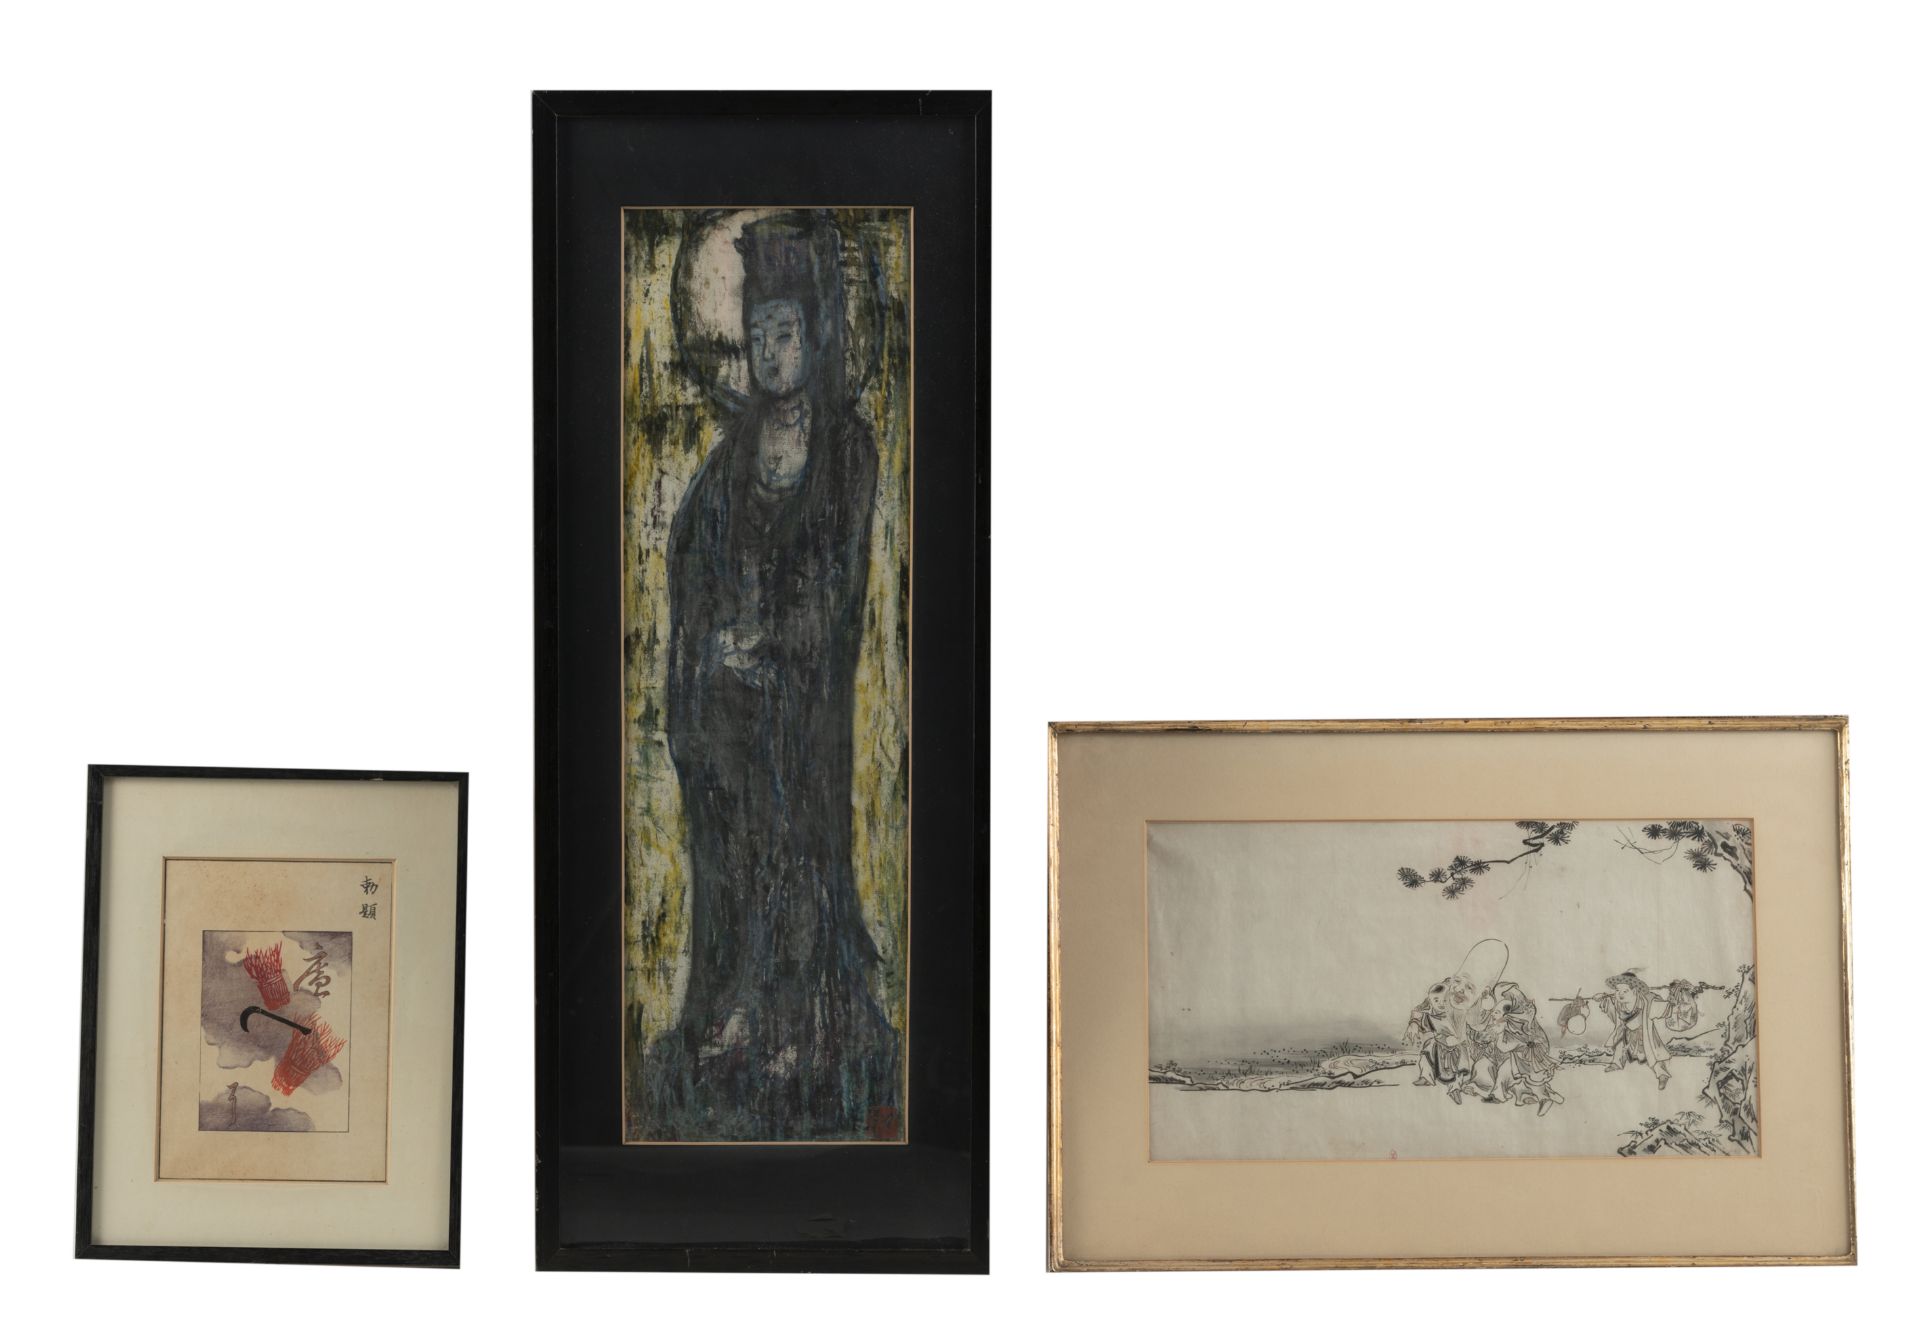 THREE FRAMED PICTURES: A STANDING GUANYIN, A WOODBLOCK PRINT WITH FUKUROKUJU AND BOYS, A SMALL ALBU